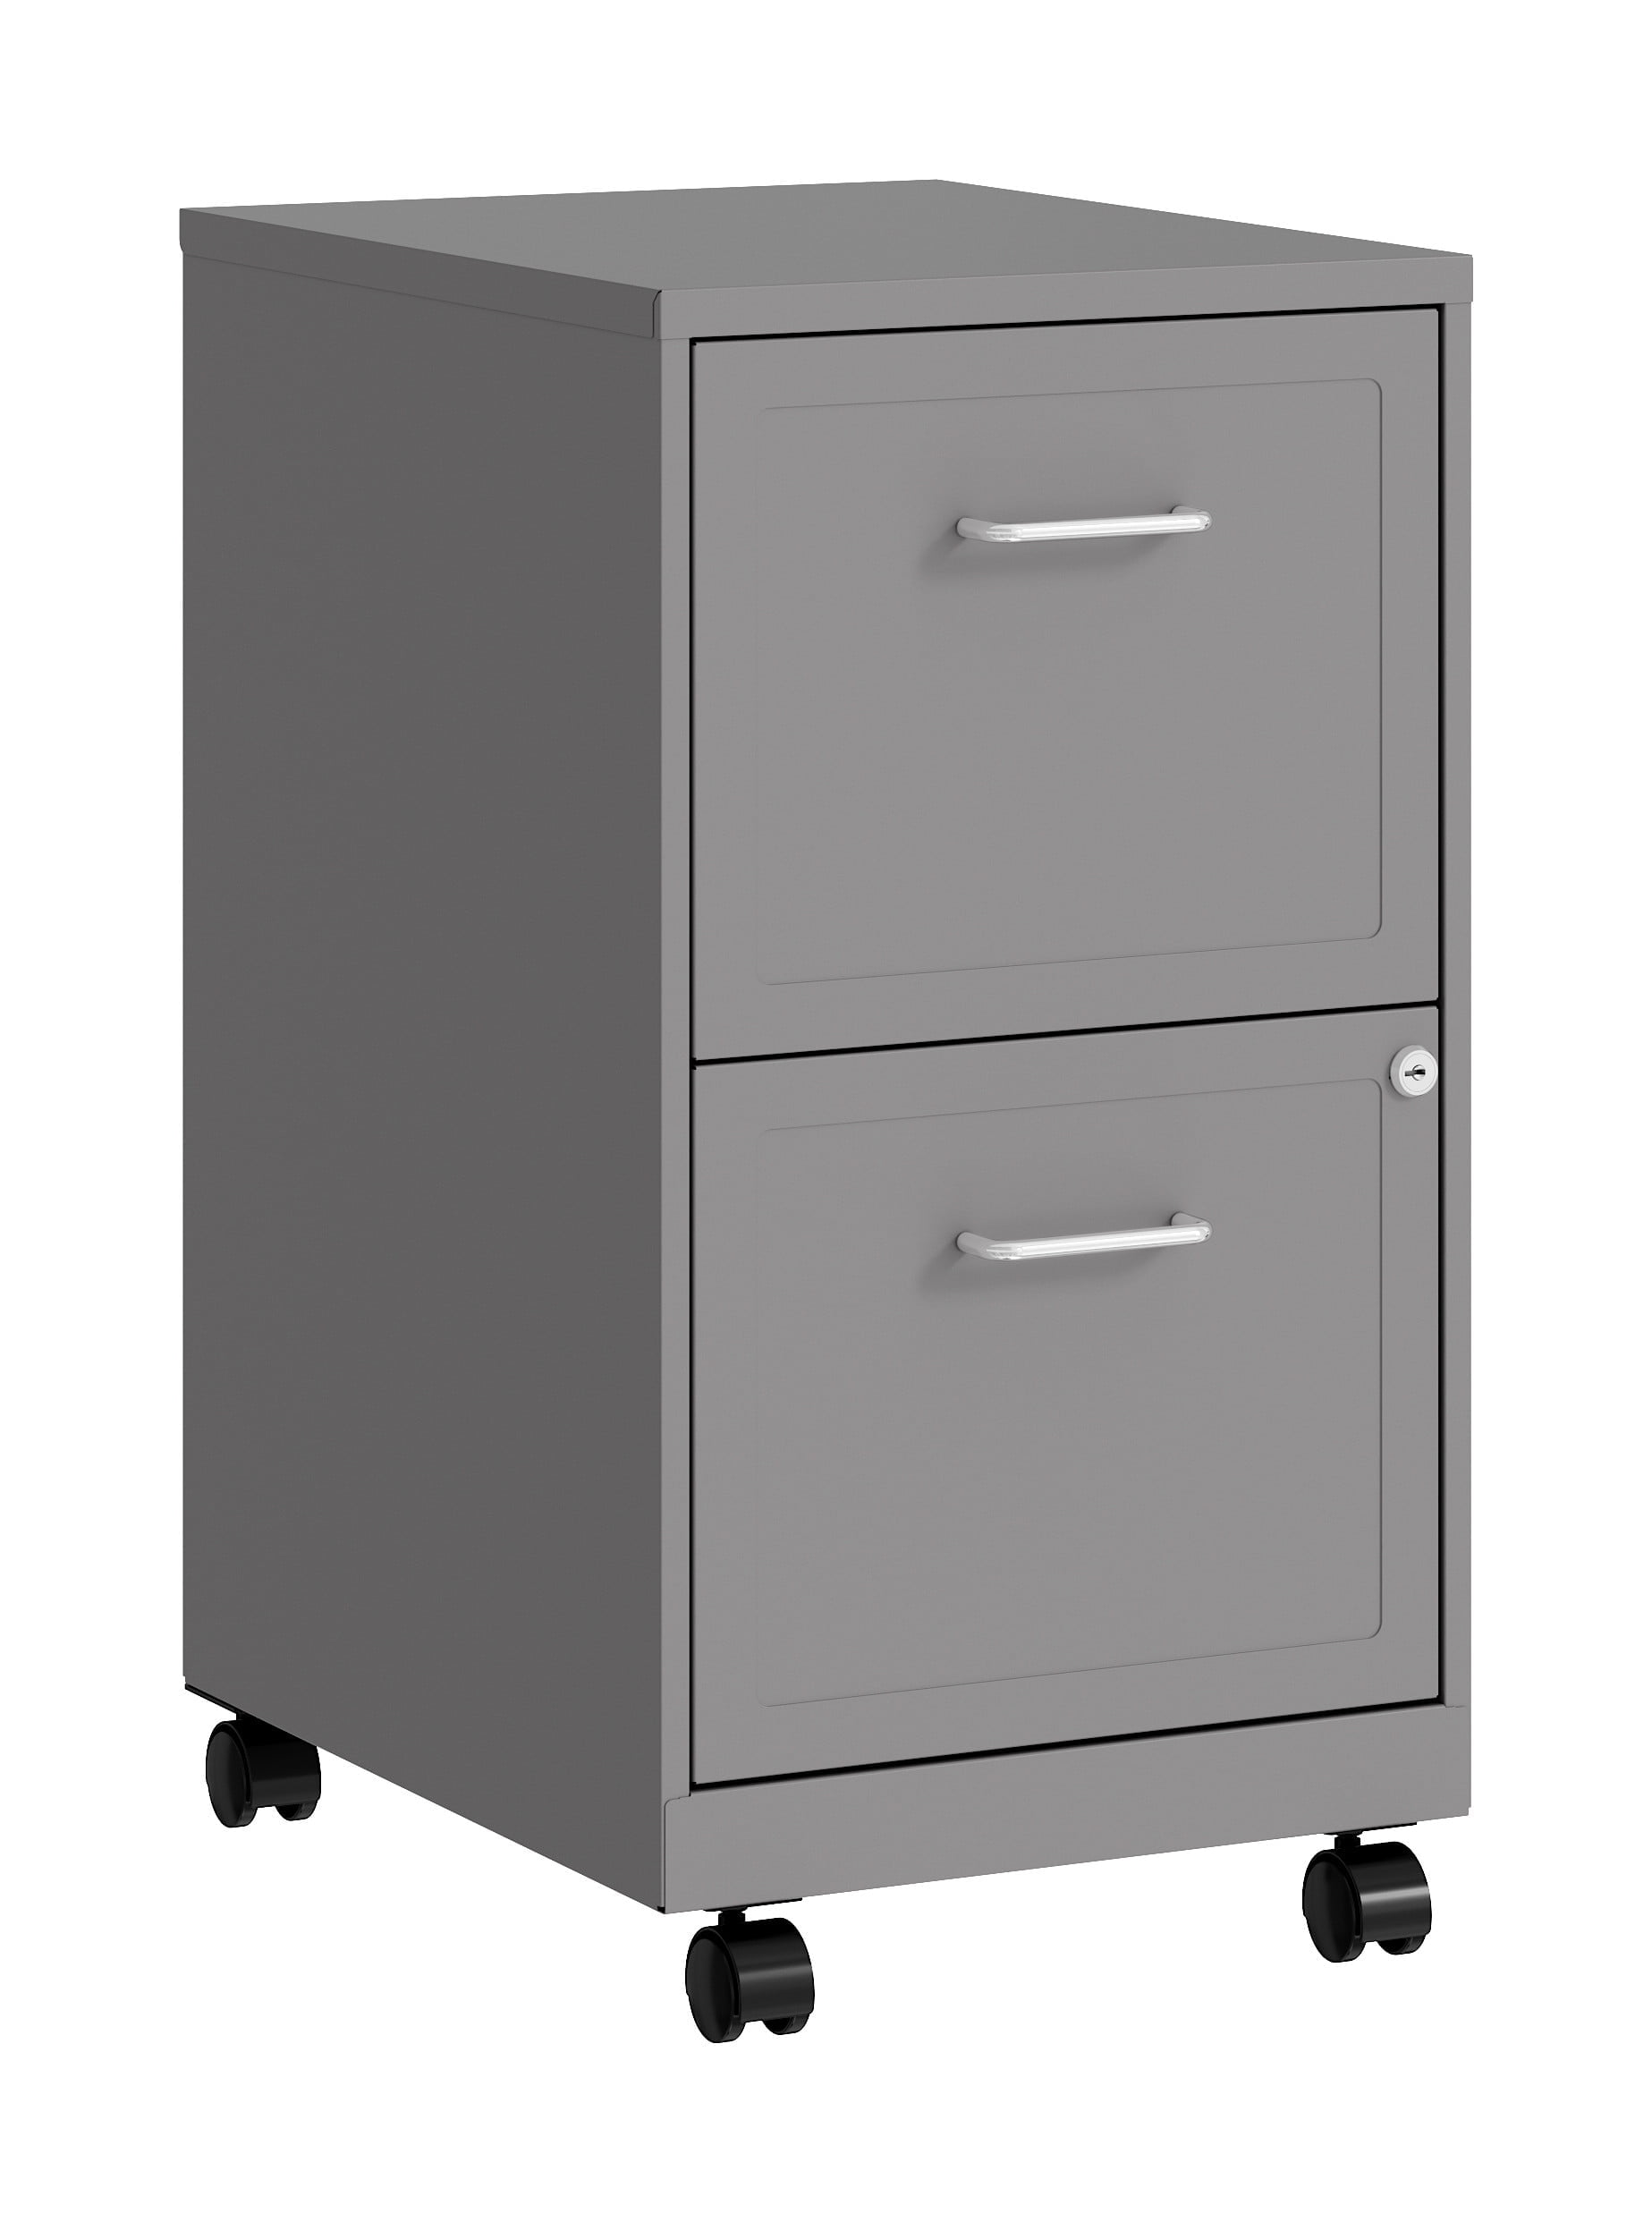 Lorell Space Solutions 18" 2 Drawer Mobile Vertical File Cabinet in Silver - image 1 of 15